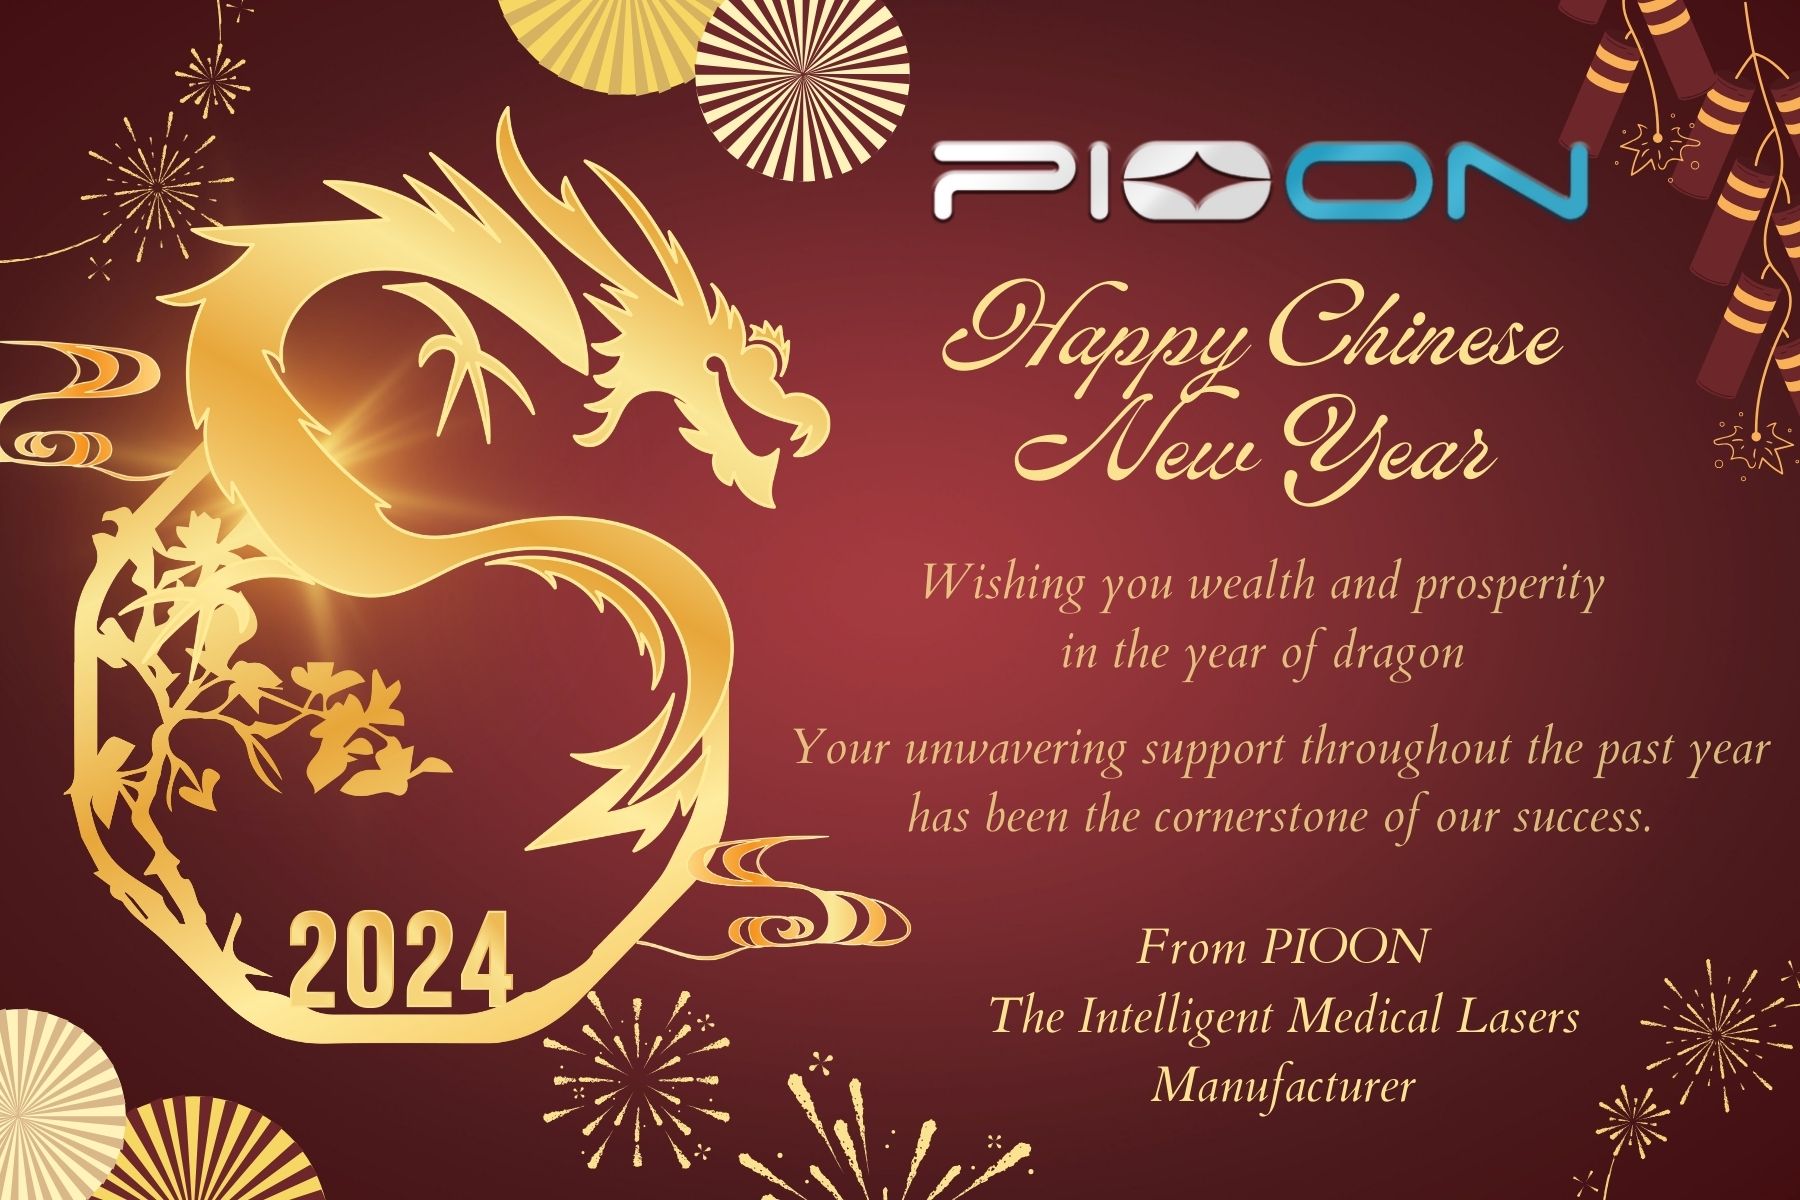 PIOON: Happy Chinese New Year